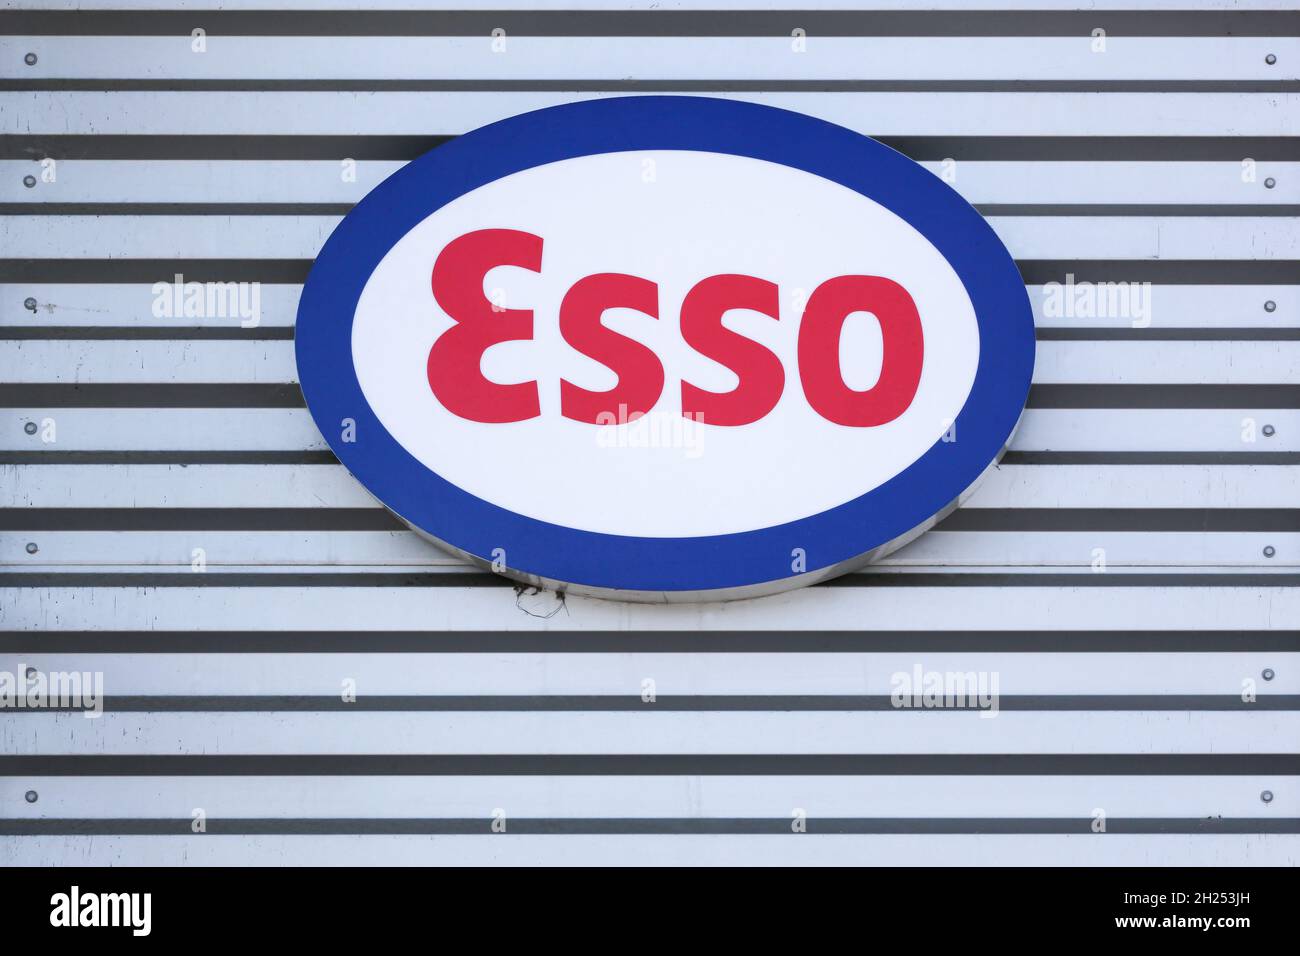 Les Cheres, France - May 21, 2020: Esso logo on a wall. Esso is an international trade name for ExxonMobil Stock Photo